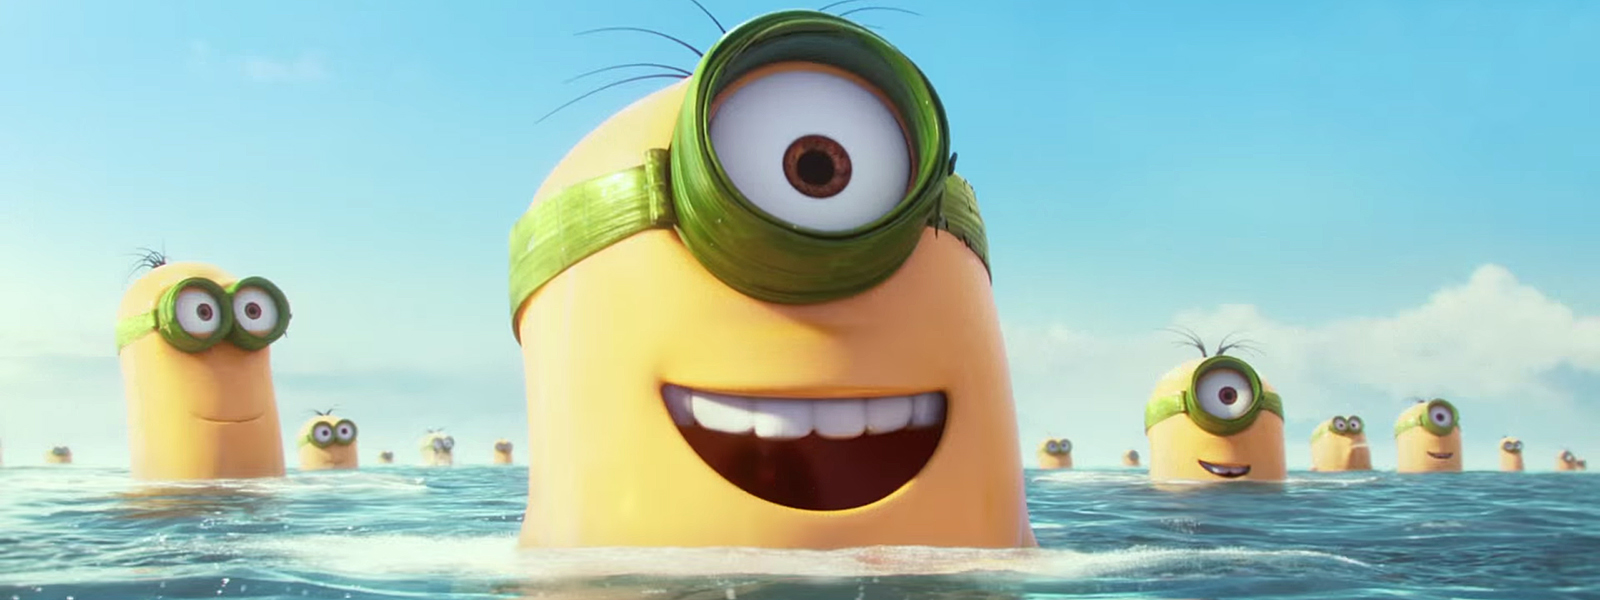 Minions – Official Trailer 1